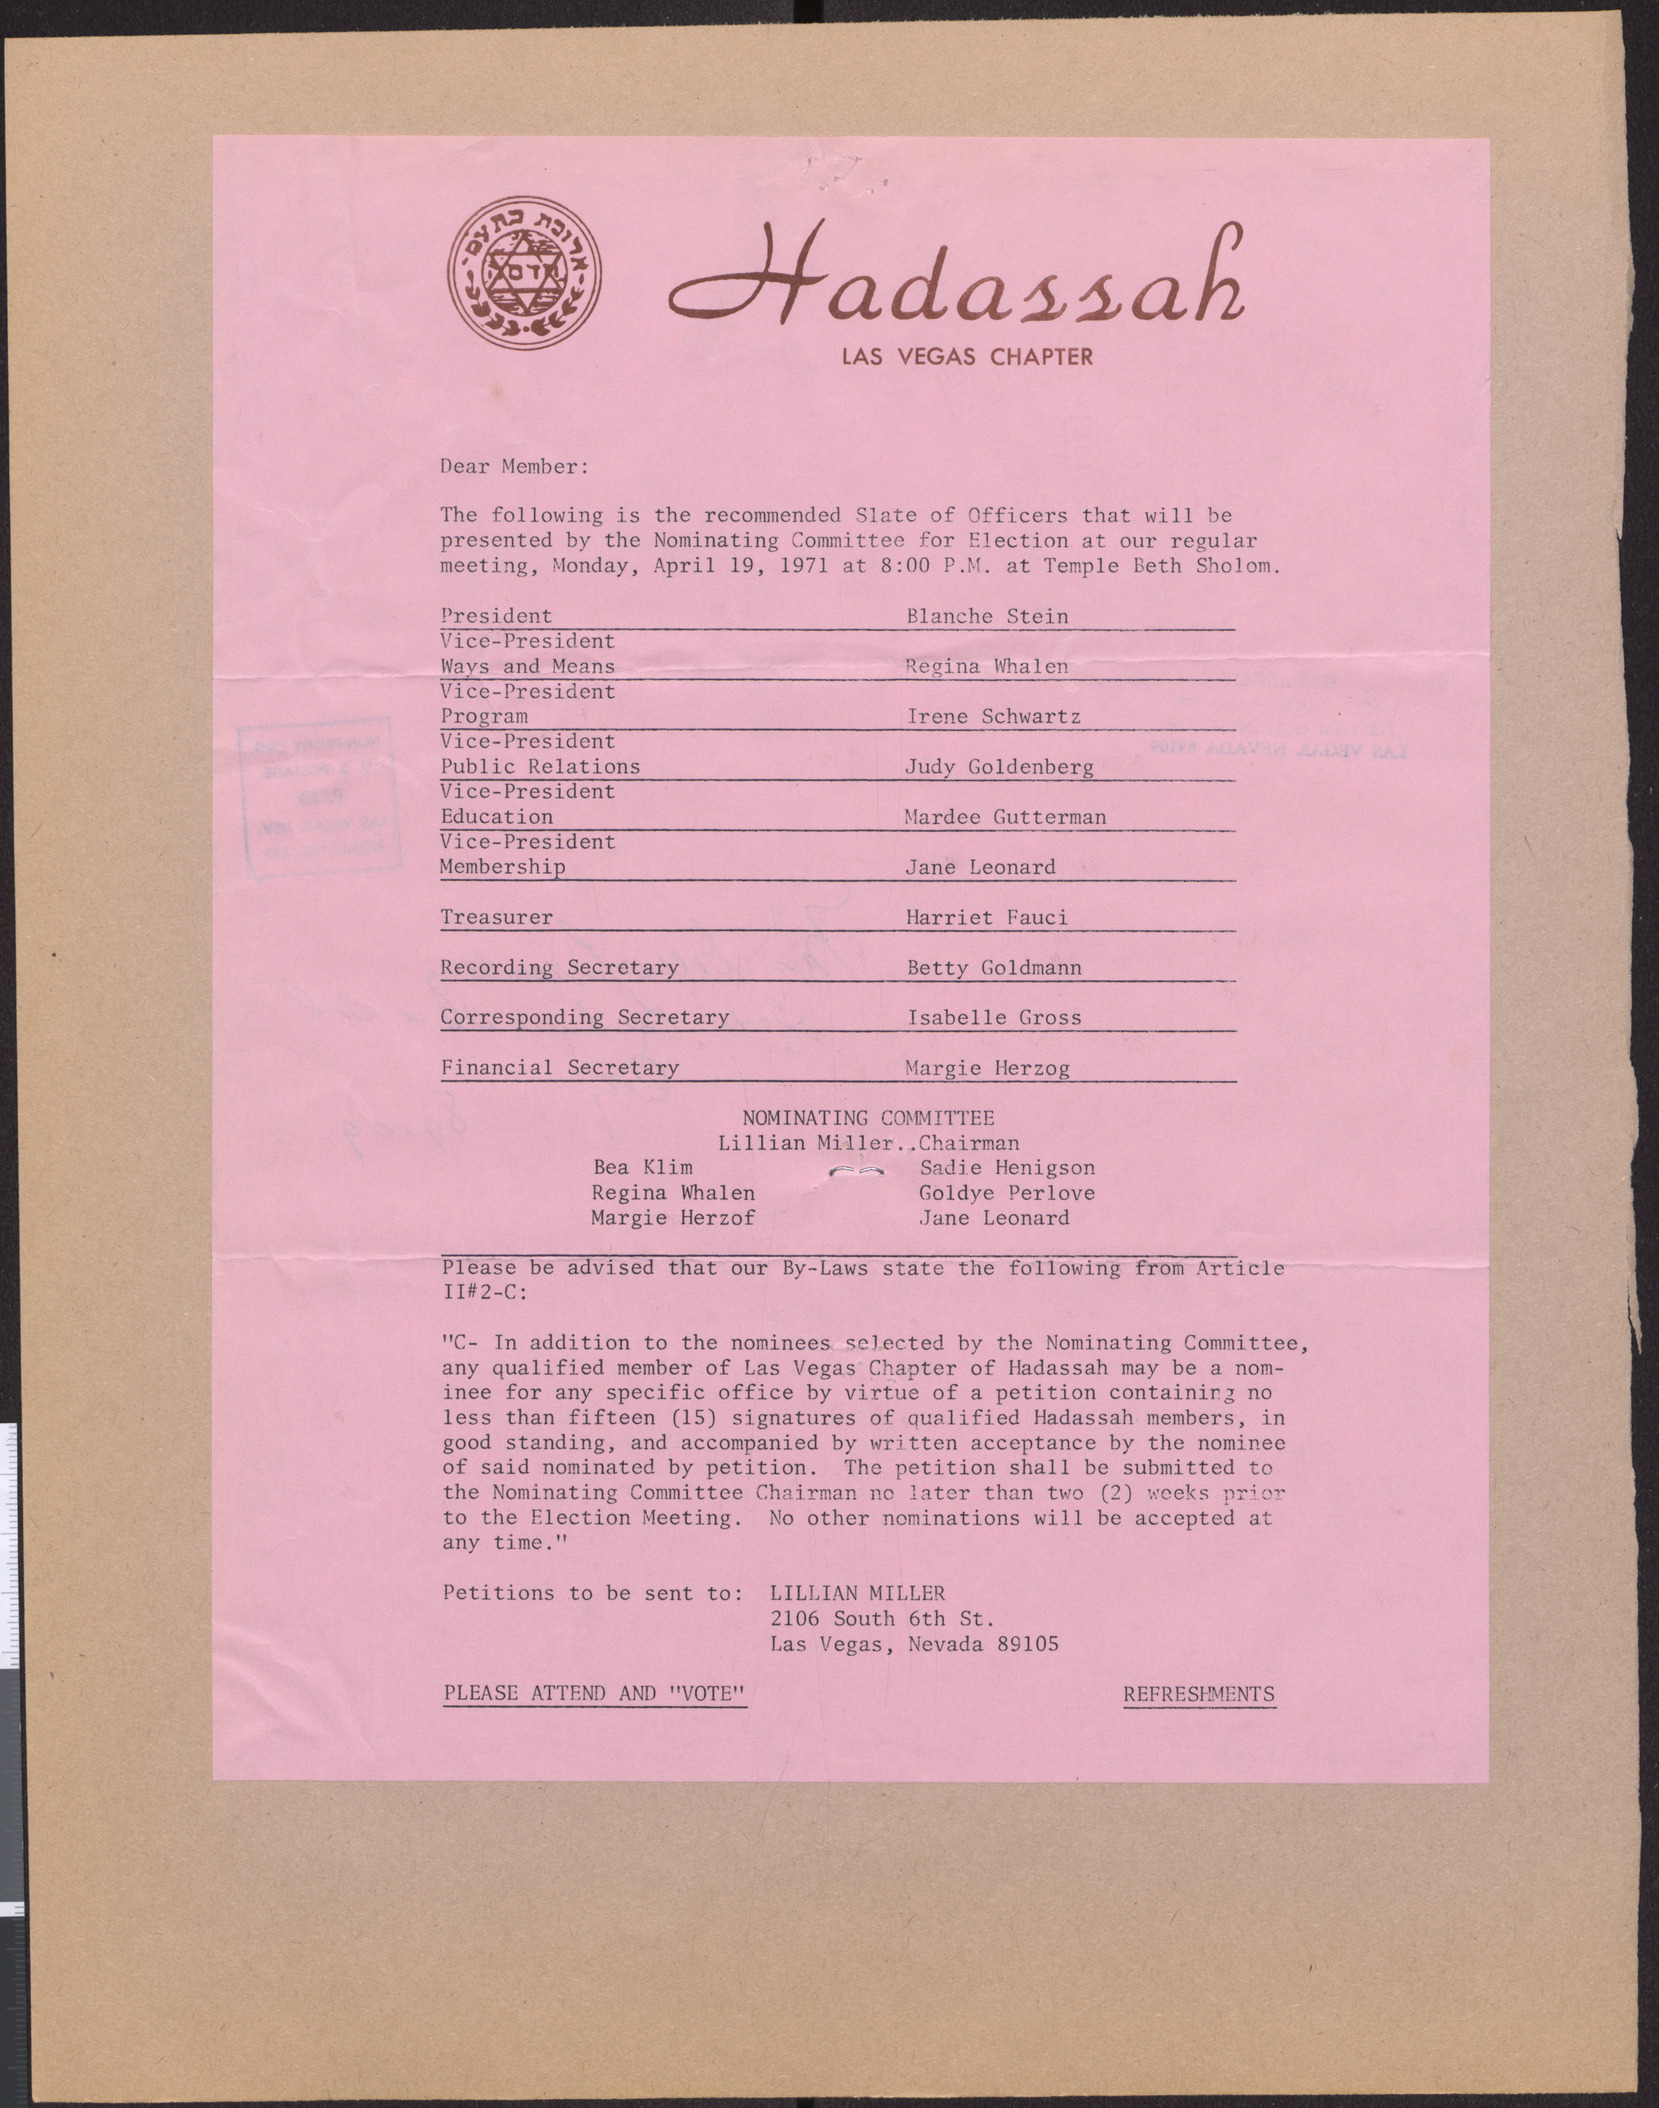 Slate of officers for Hadassah election, April 19, 1971